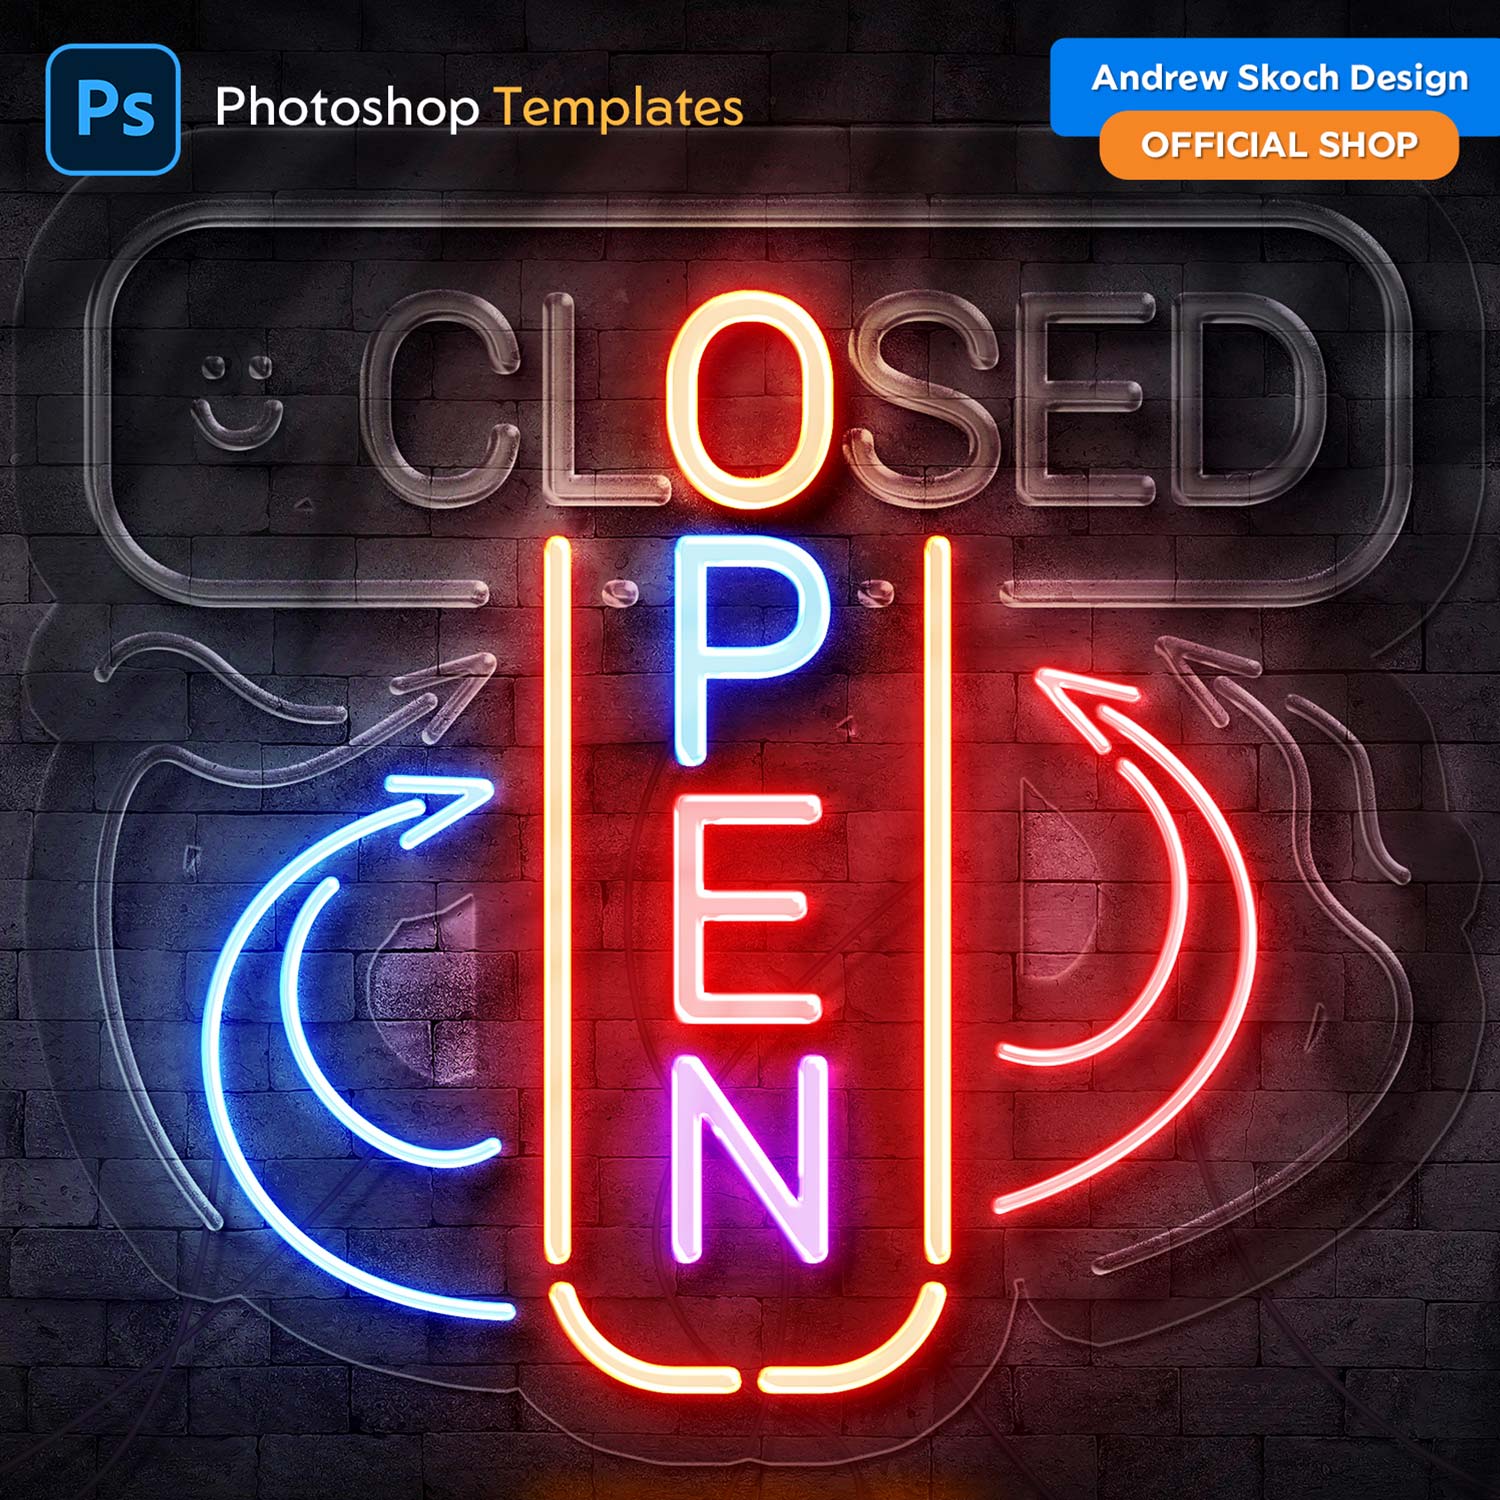 Neon On Off Switch Light – Photoshop Template cover image.